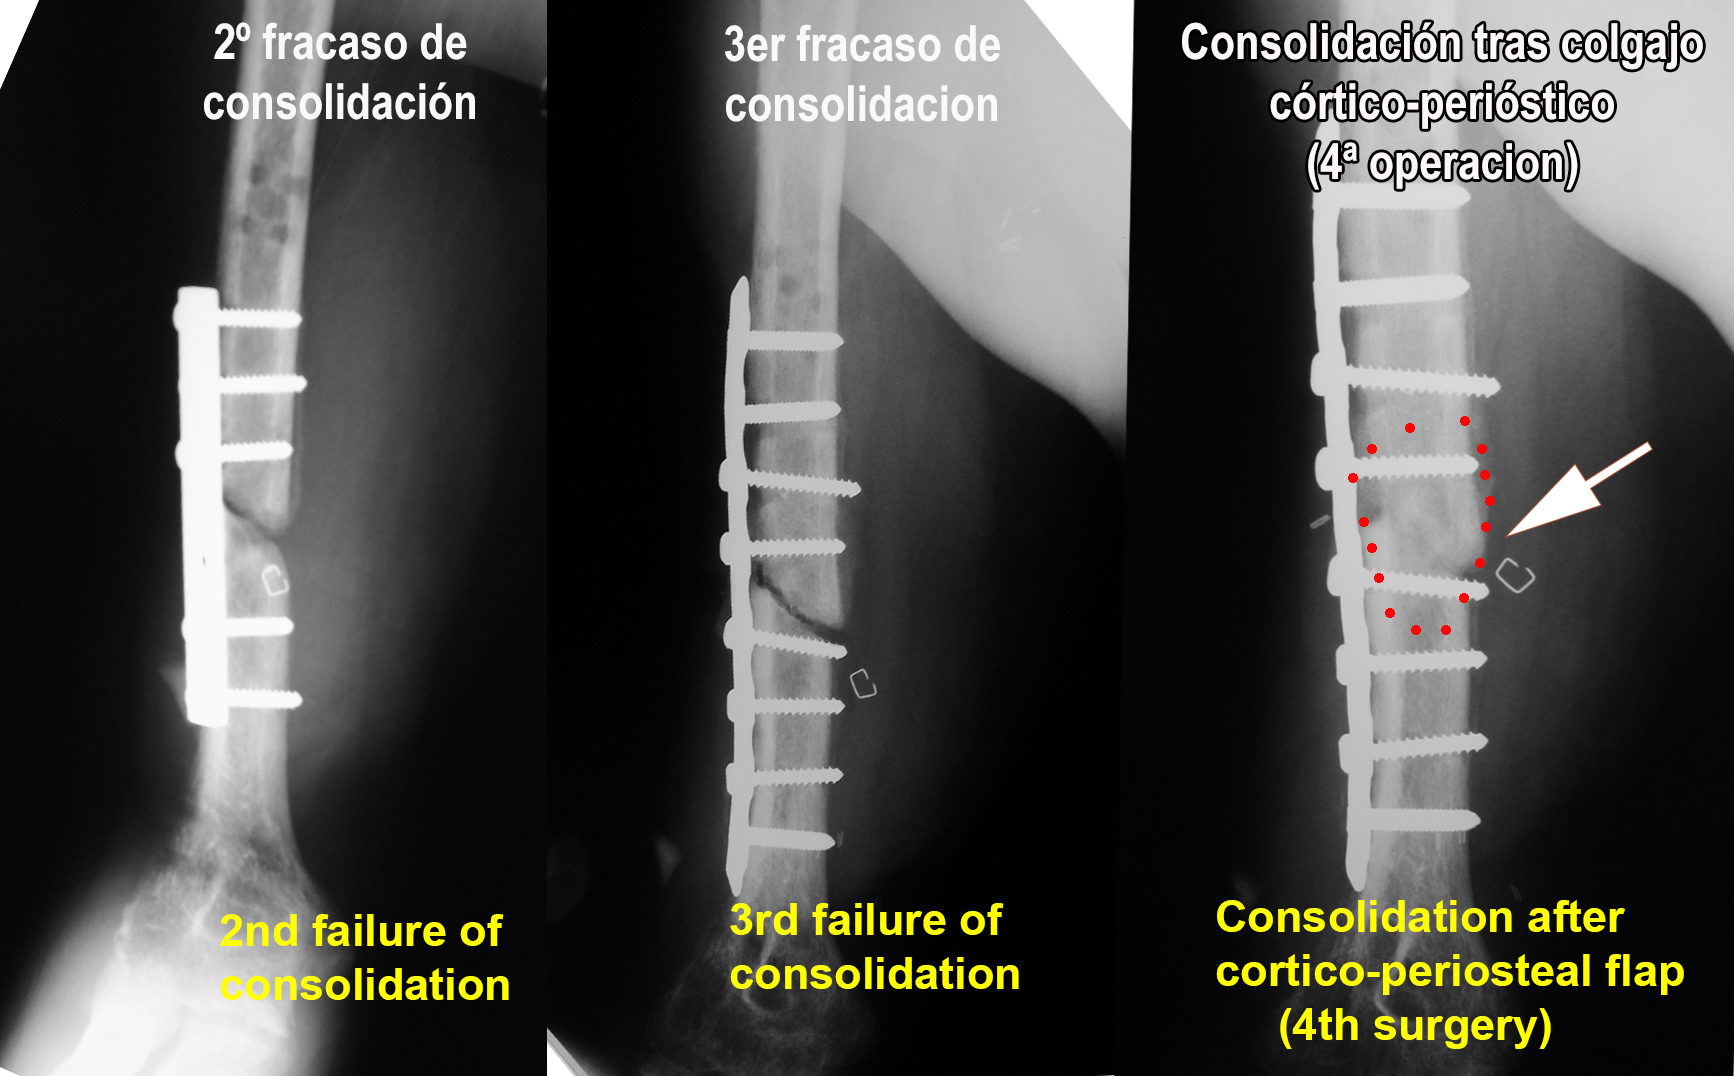 Consolidation after cortico-periosteal flap